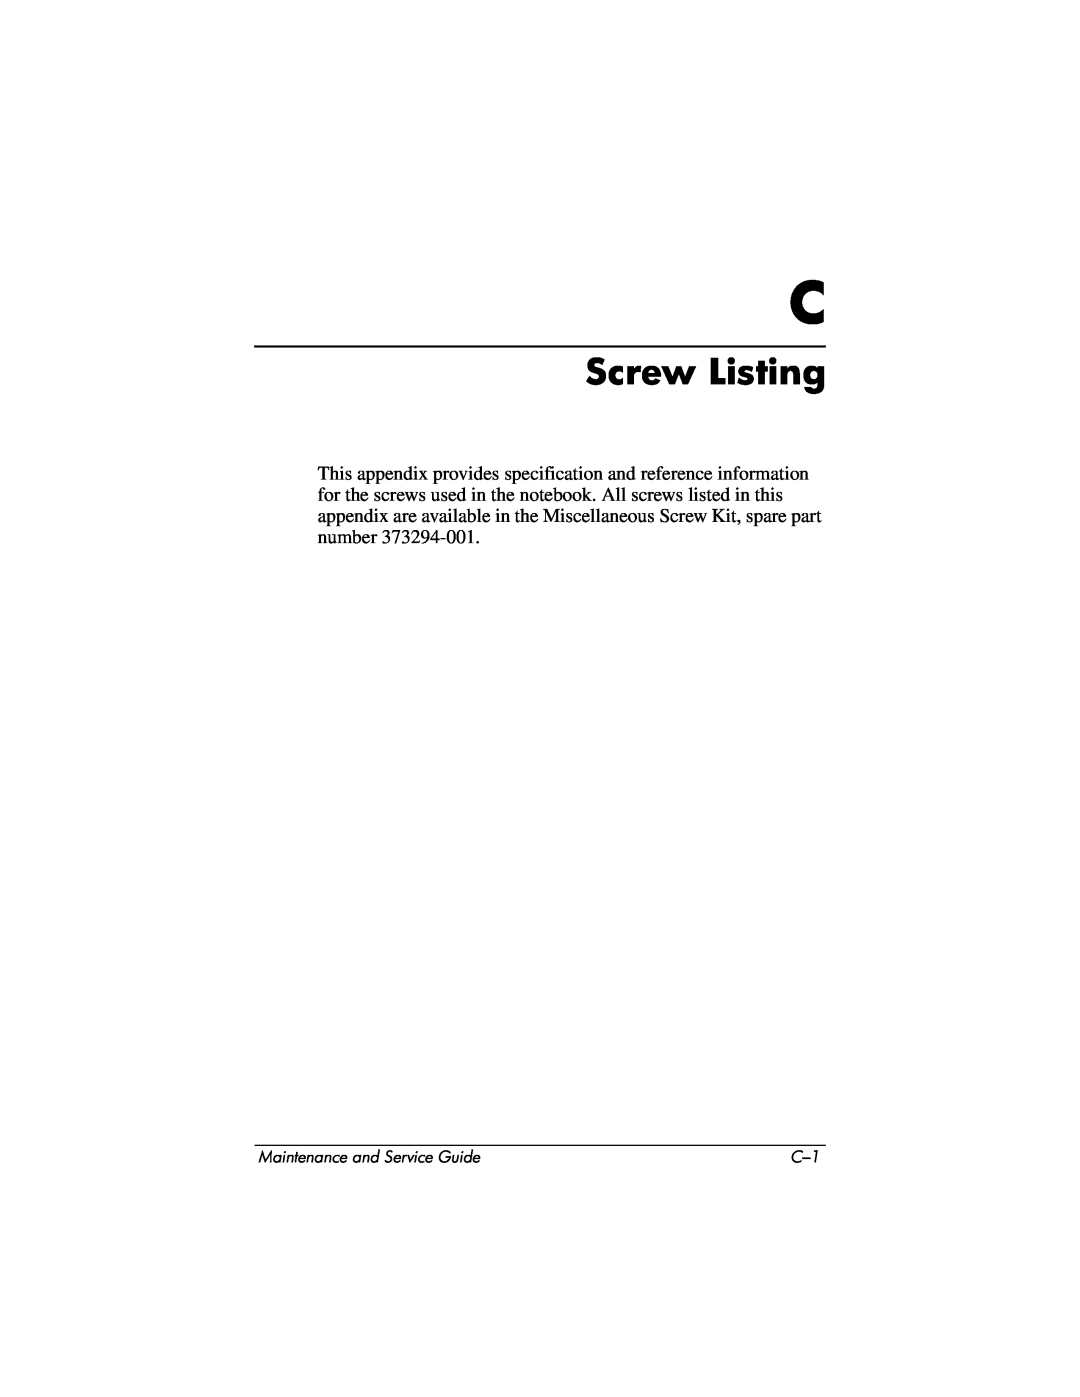 HP NX9030, NX9040, NX9020, ZE4900 manual Screw Listing, Maintenance and Service Guide 